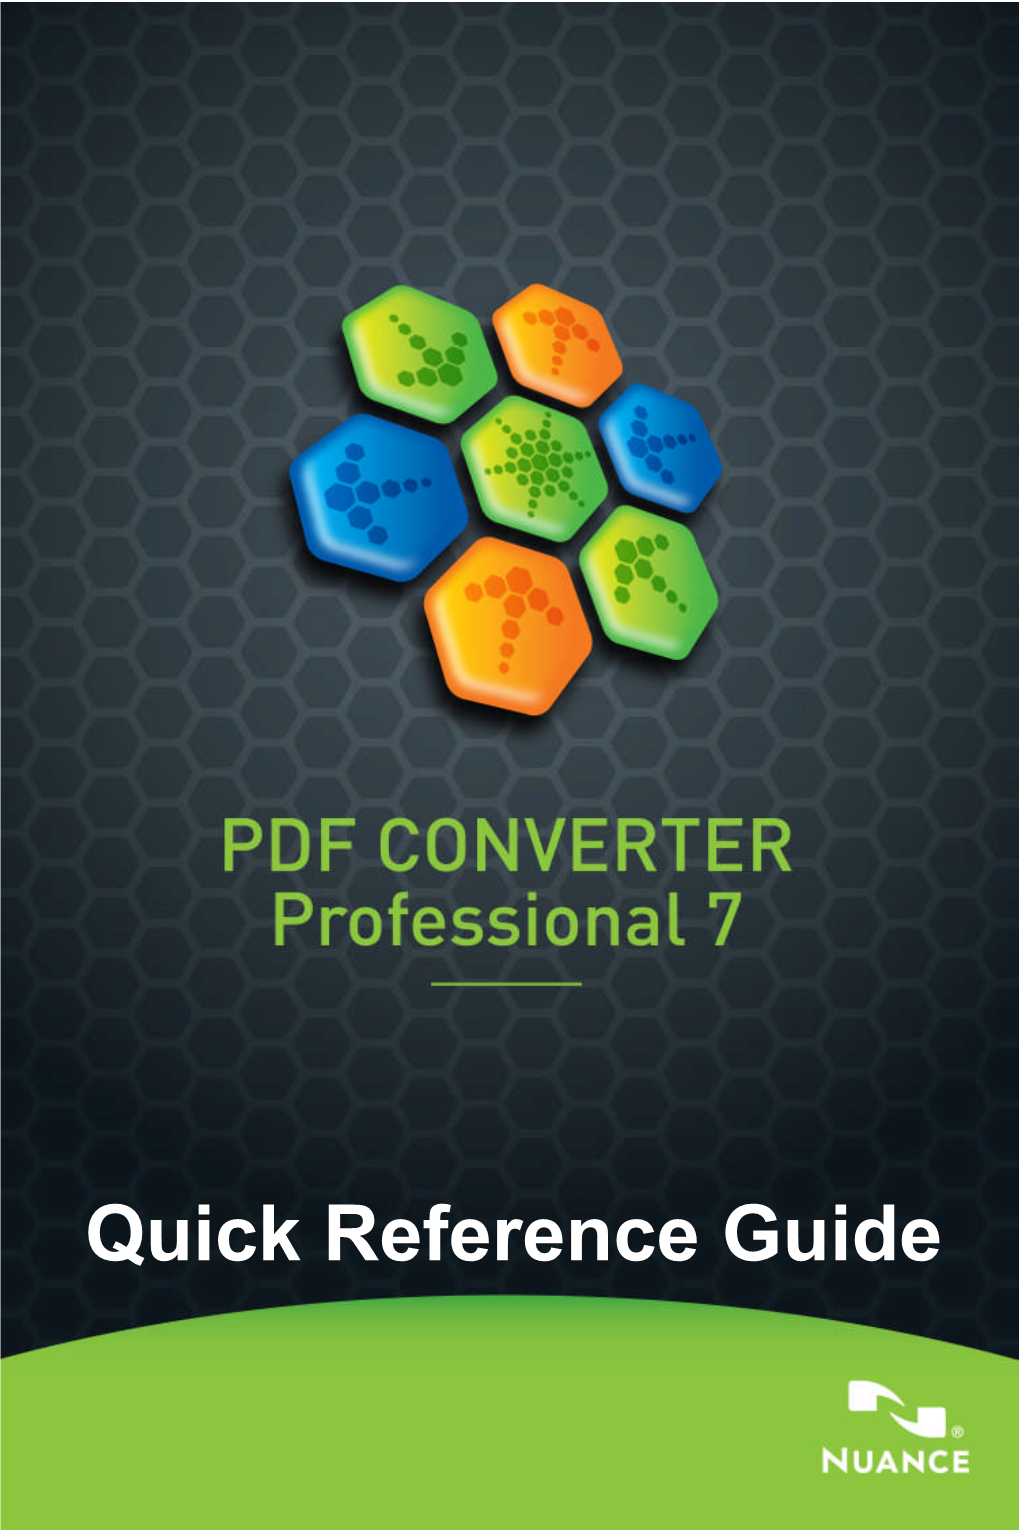 PDF Converter Professional 7 Quick Reference Guide